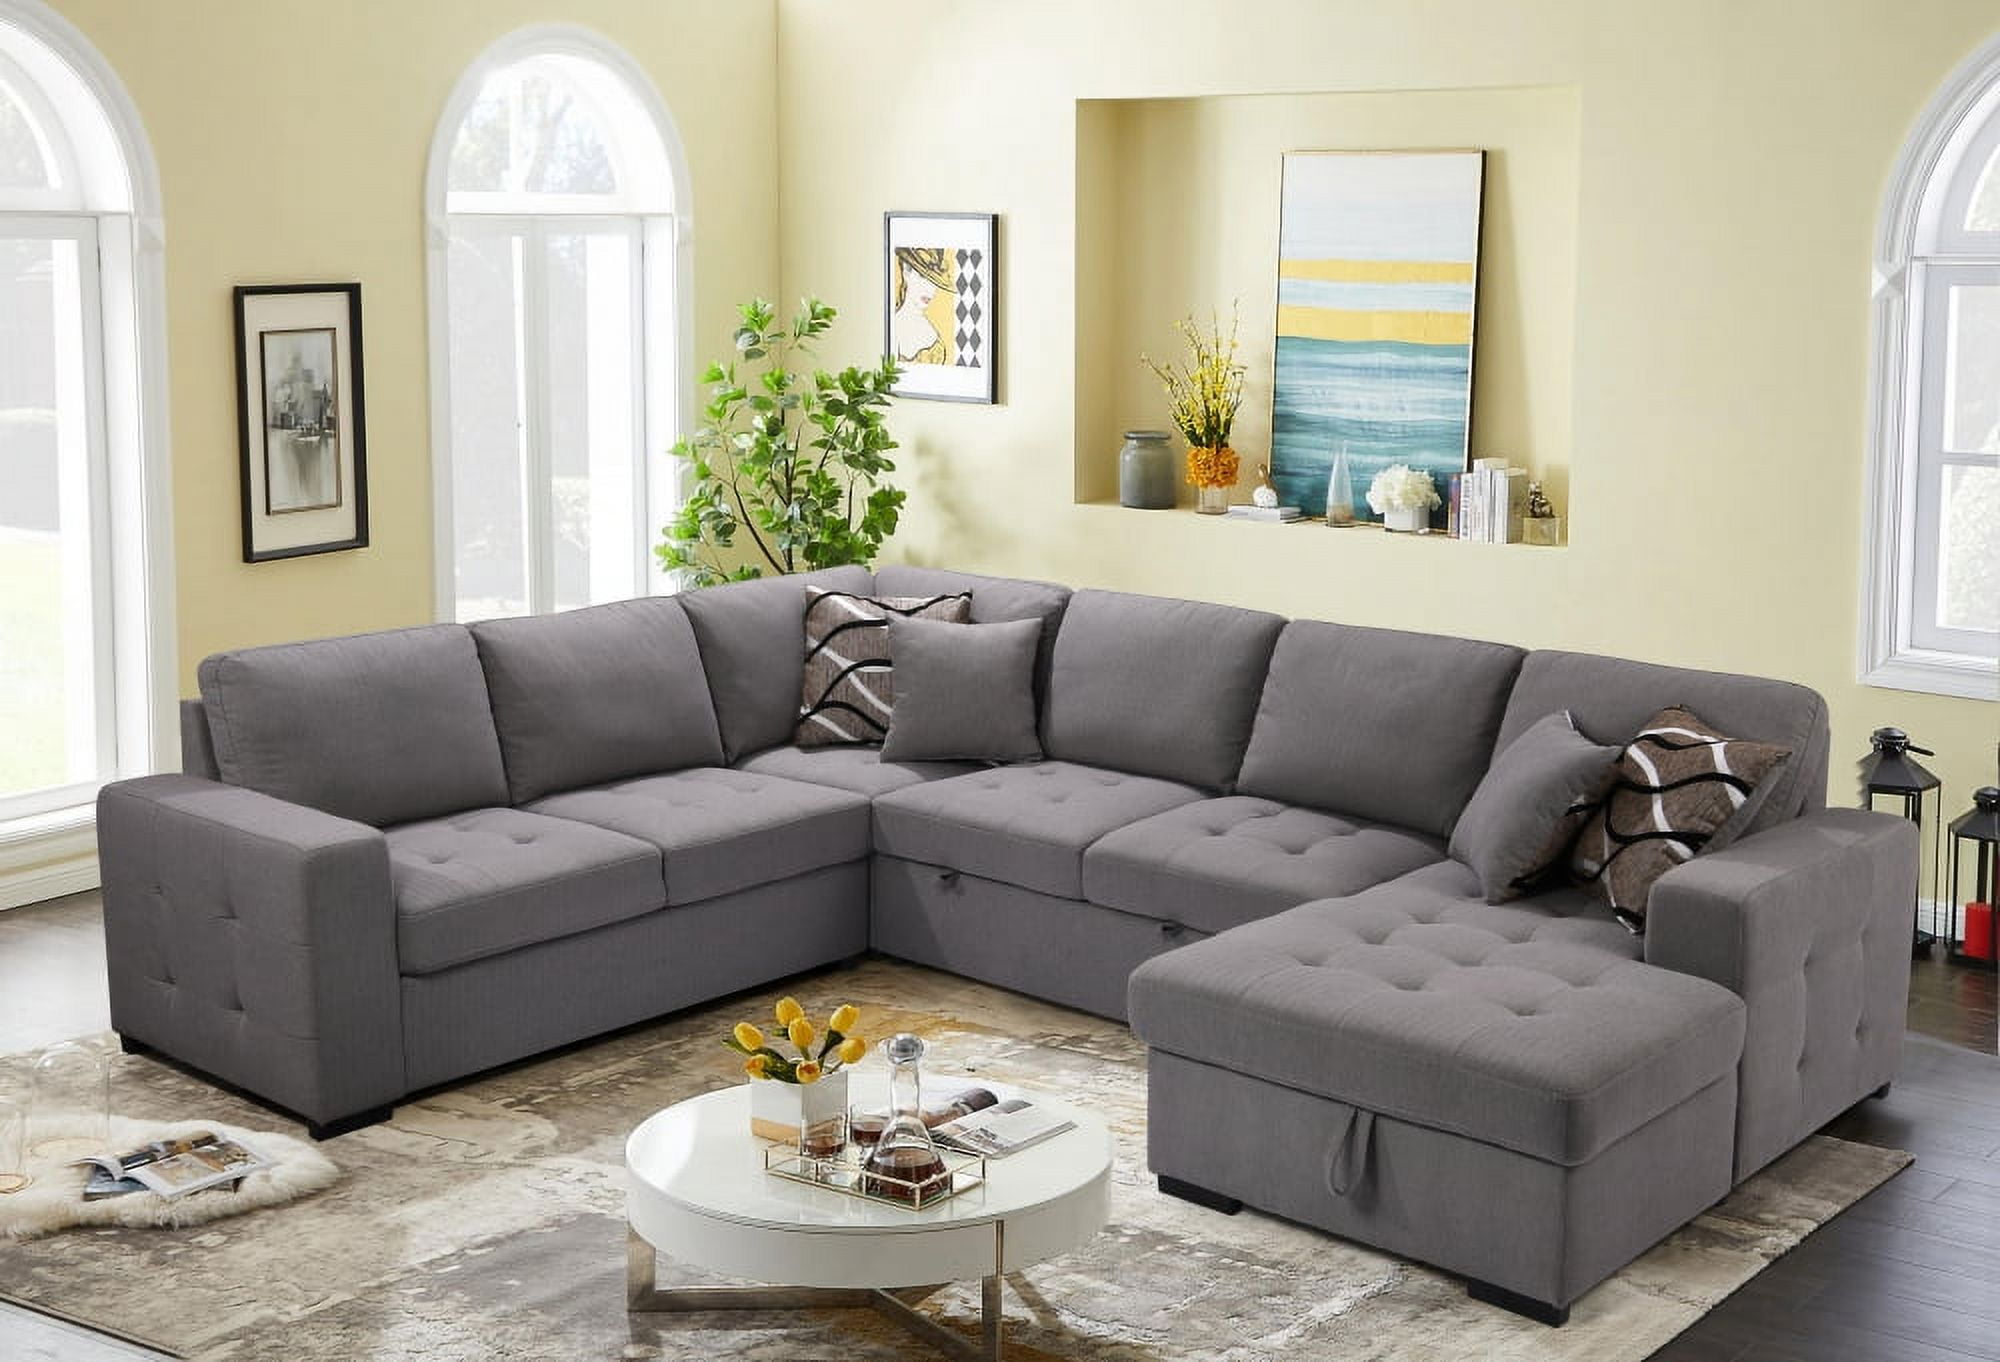 123 Oversized Sectional Sofa U Shaped Couch With Storage Chaise And Pull Out Seating Convertible Futon Sleeper 4 Throw Pillows Cushion Backs For Living Room Grey Com